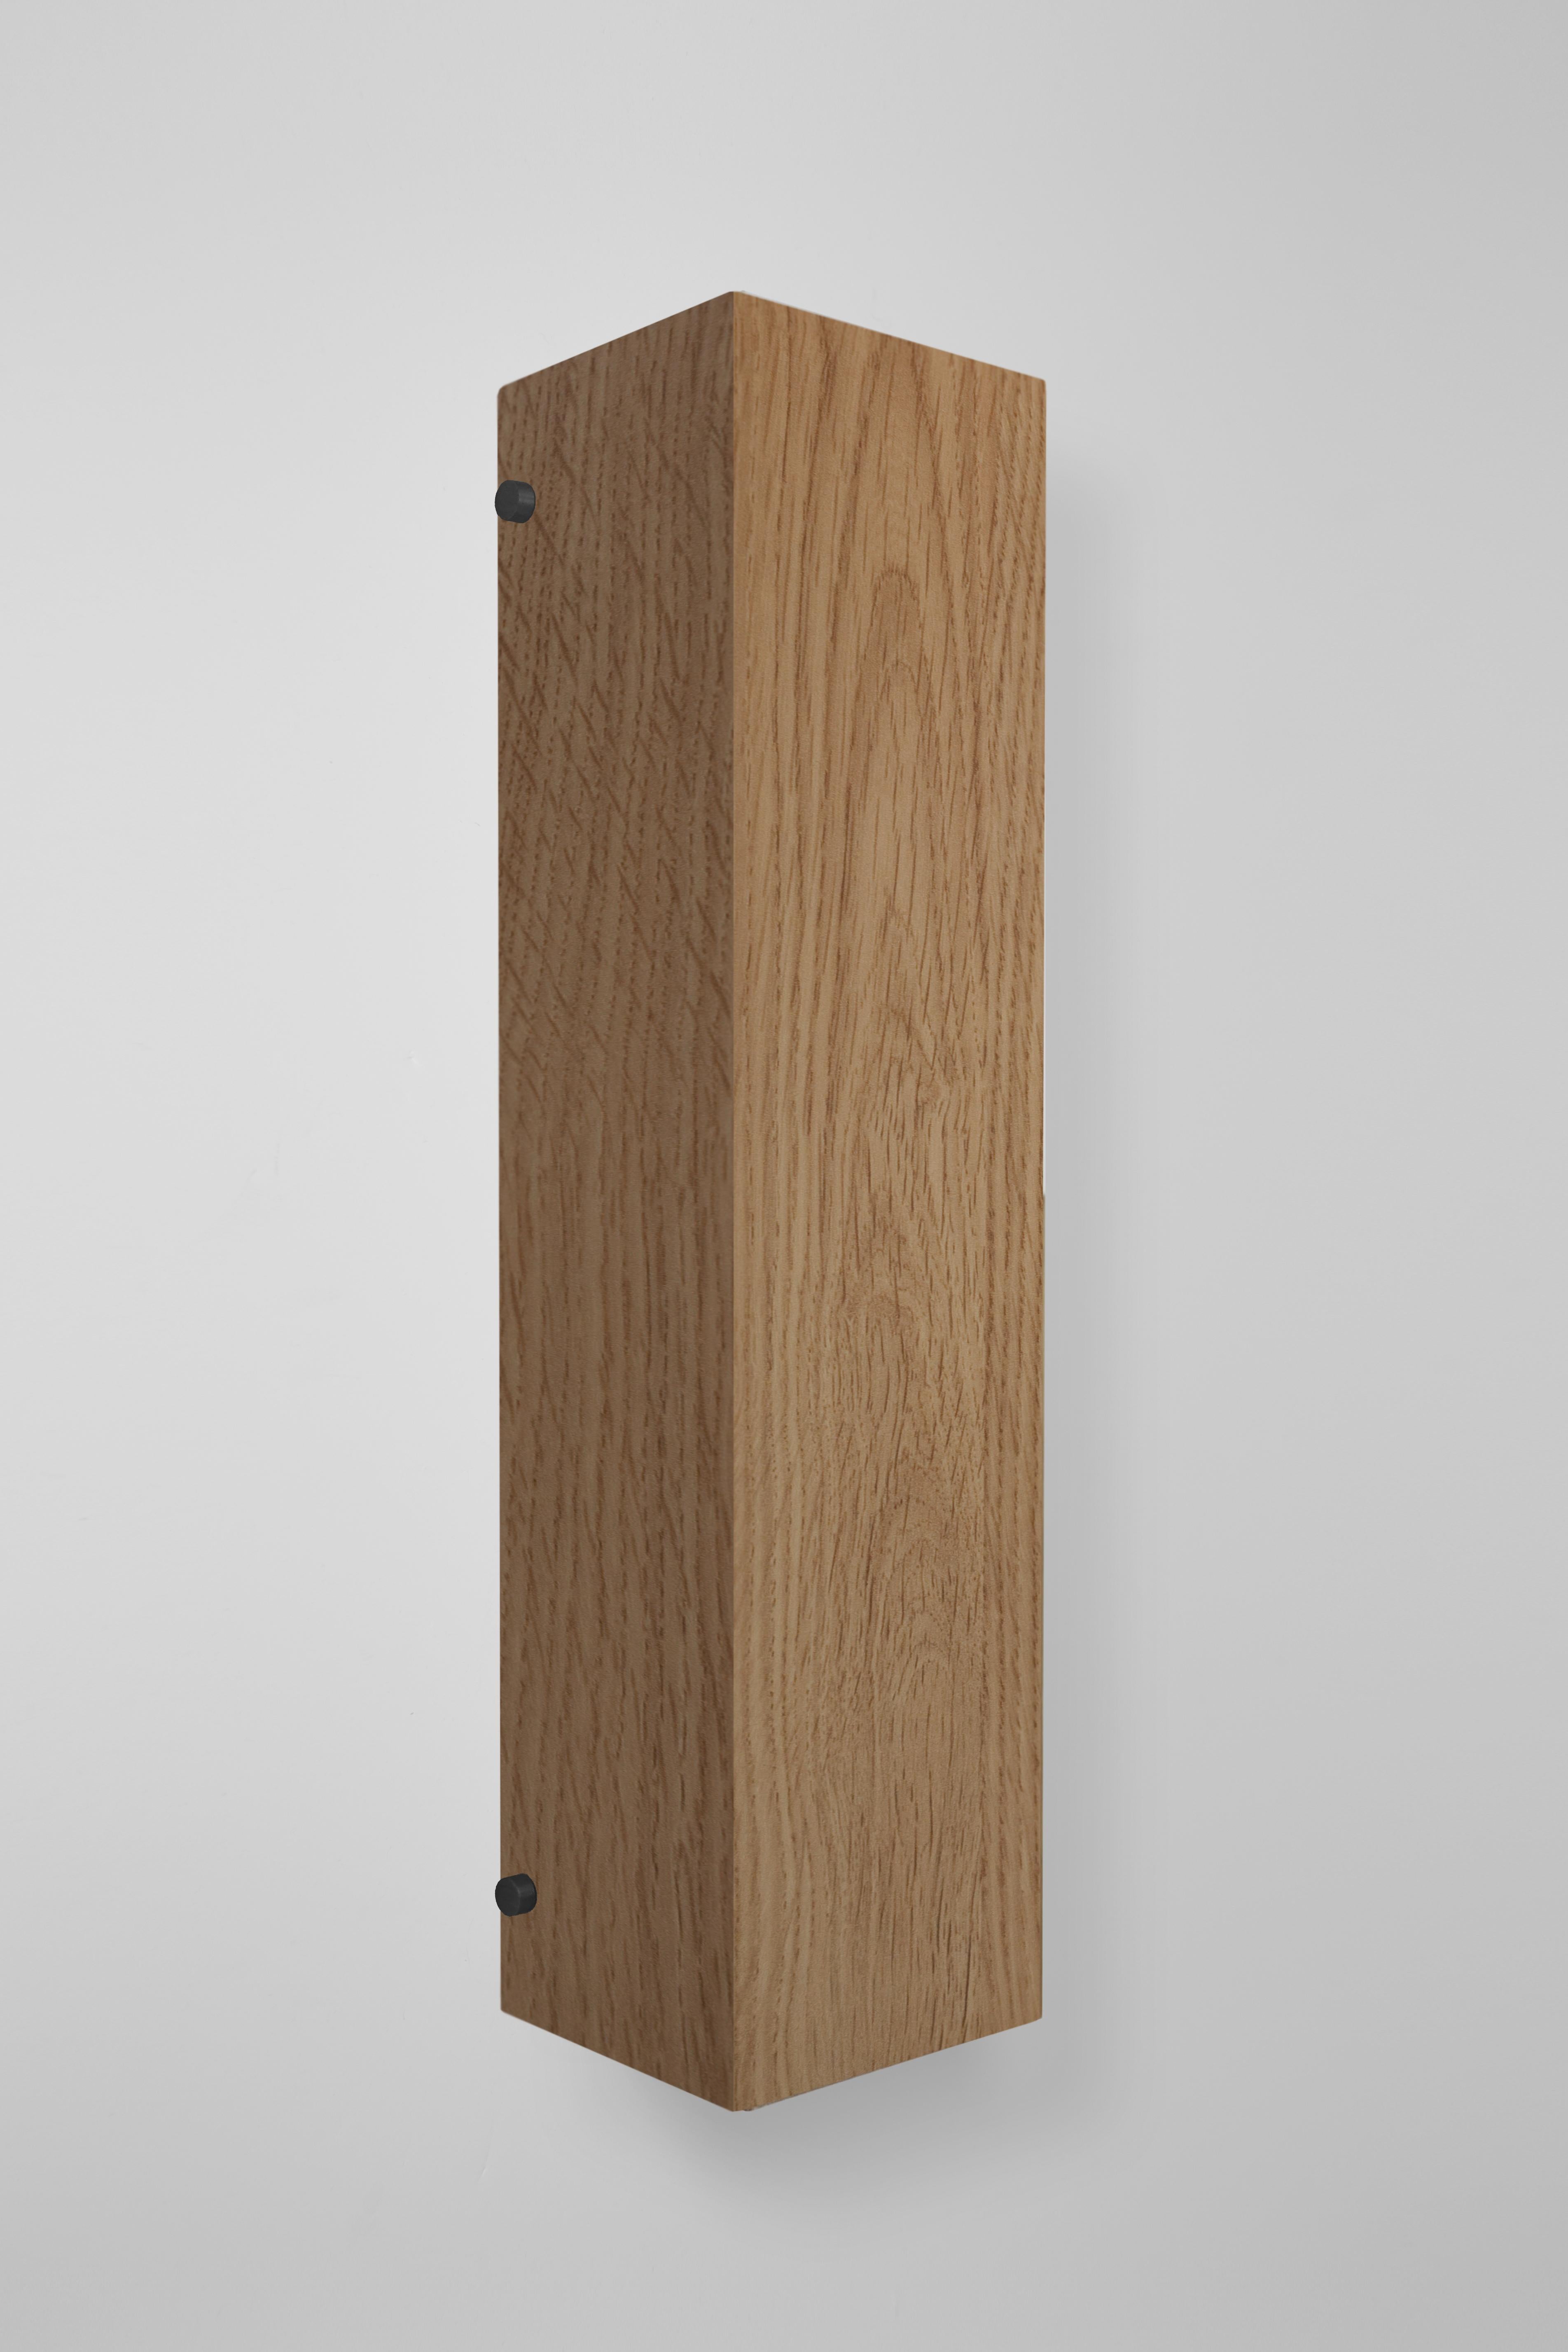 Orphan Work 100W Sconce
Shown in oak with blackened brass.
Available in natural oak with brushed or blackened brass.
Measures: 19” H x 4 3/4